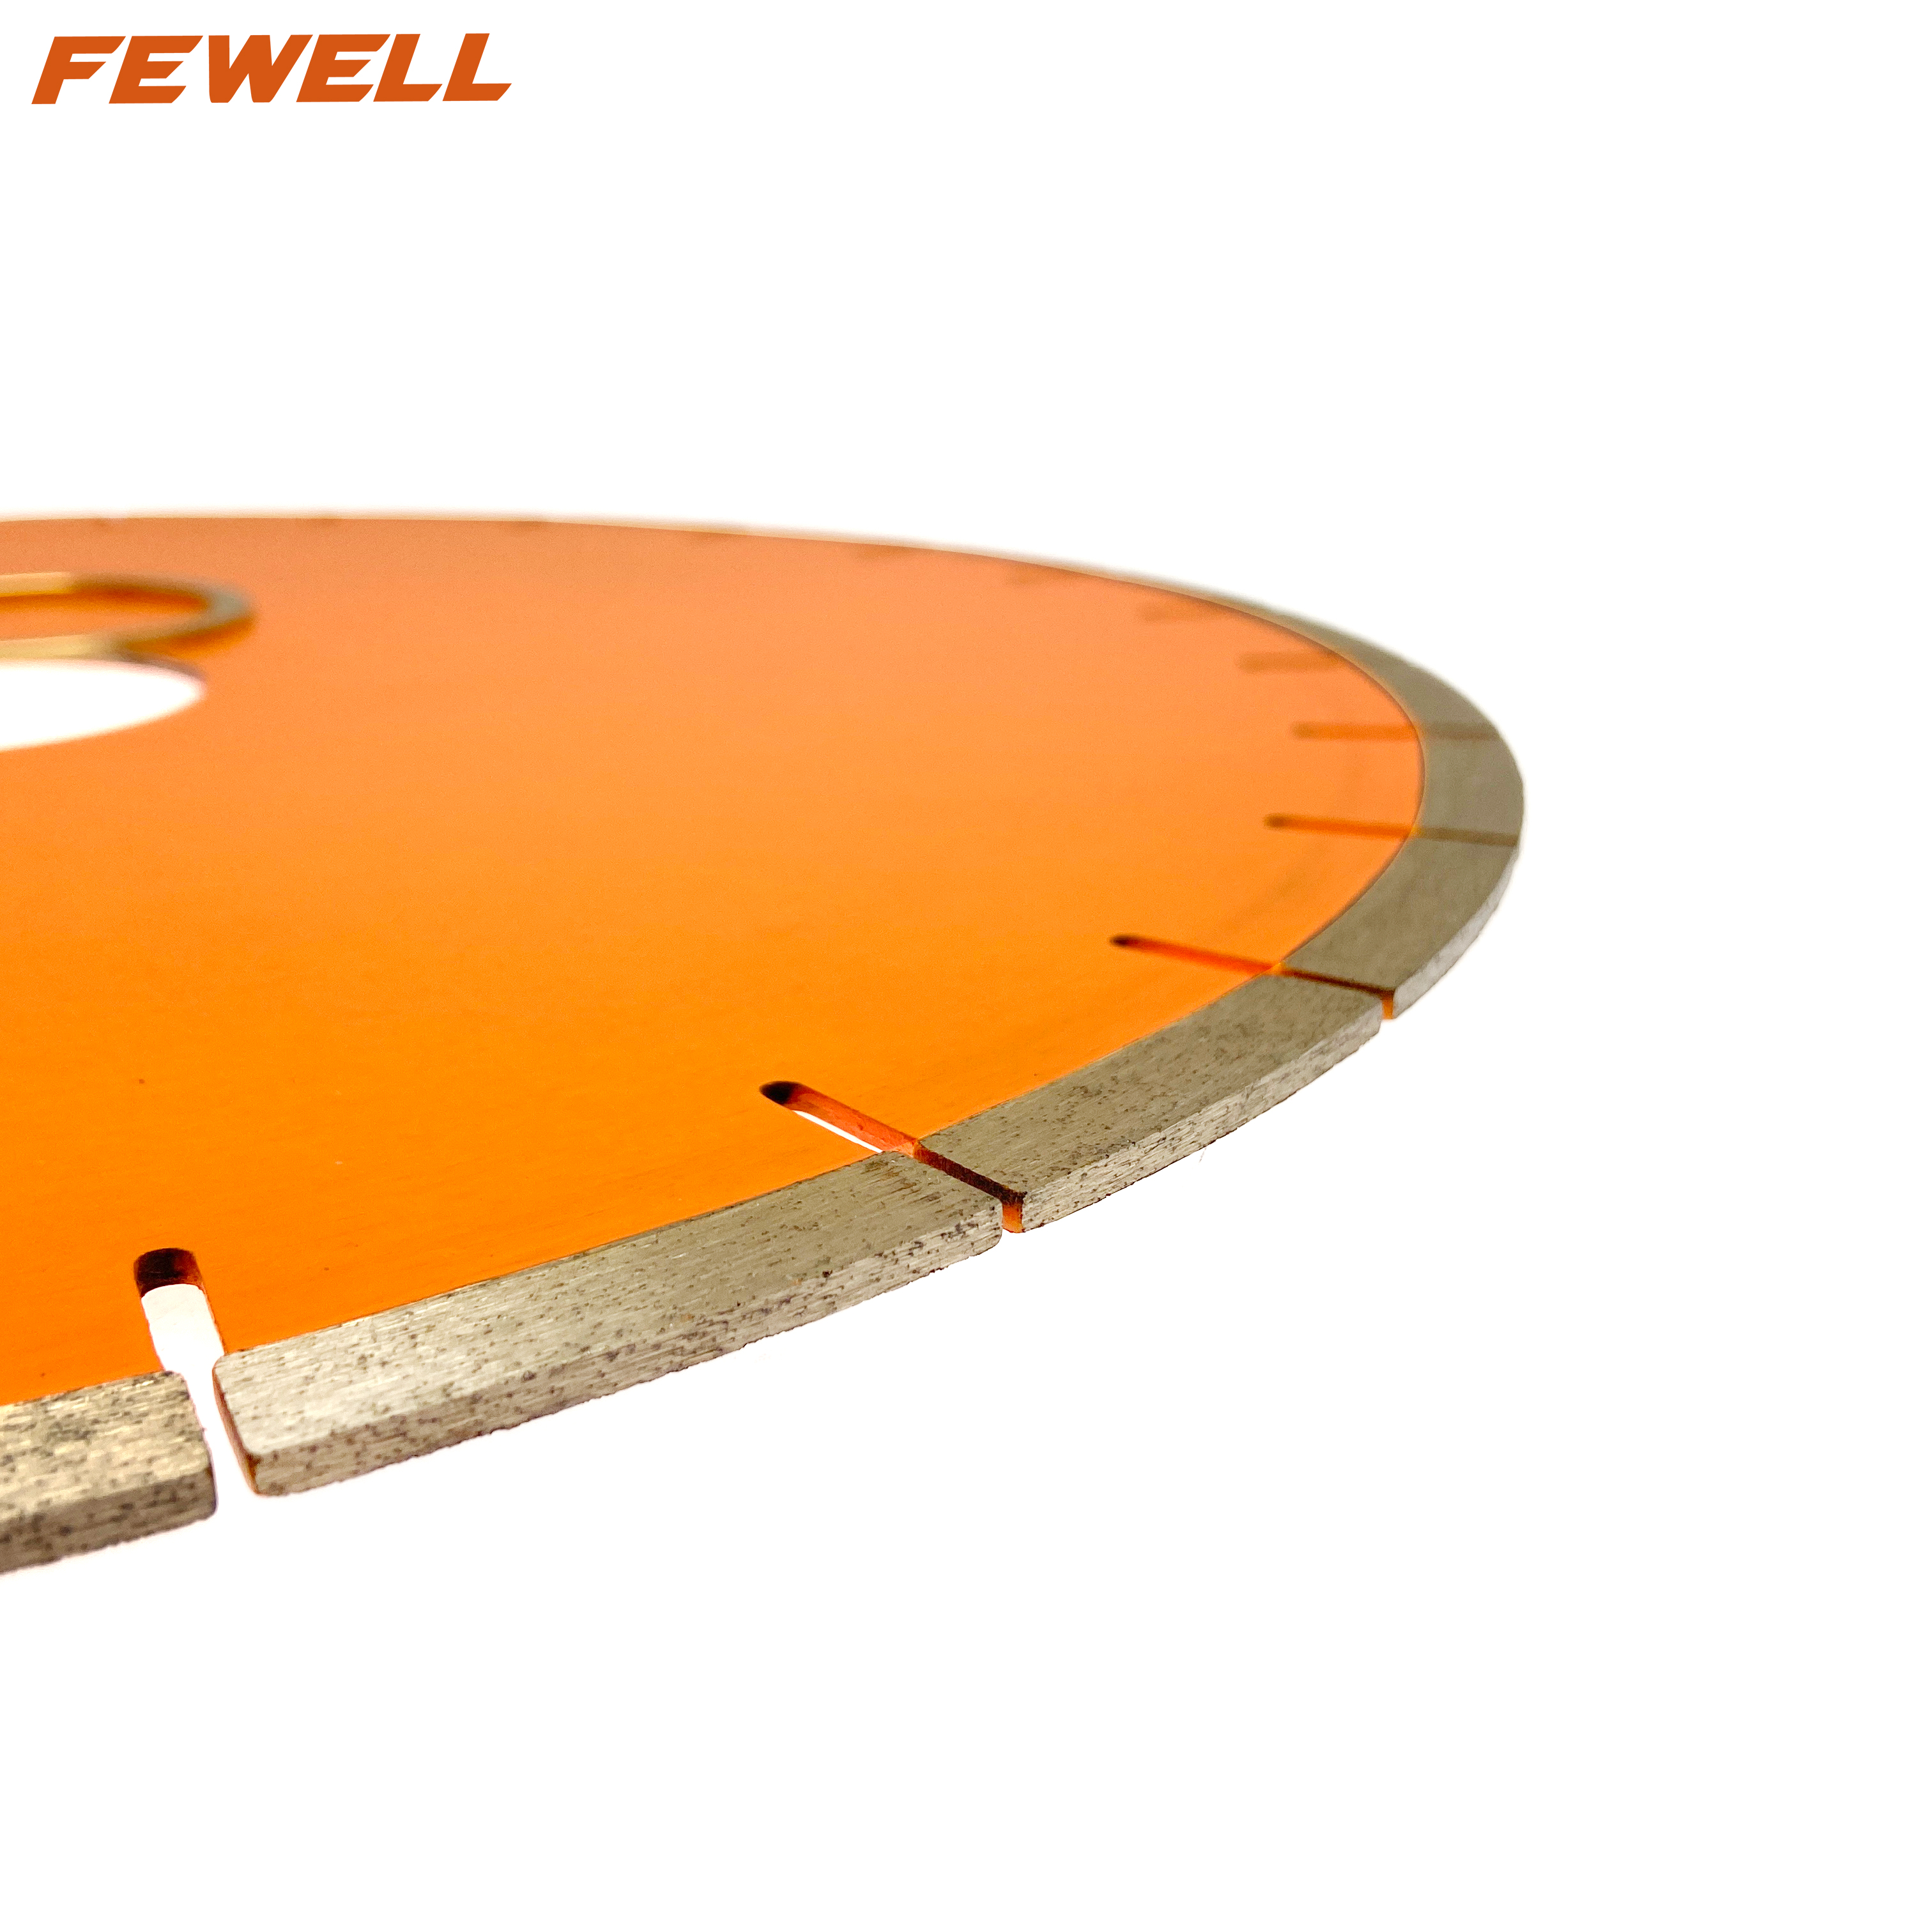 High quality Silver Brazed sandwich Silent steel 14-18inch 370/420/450*10*60mm diamond saw blade disc for wet cutting marble